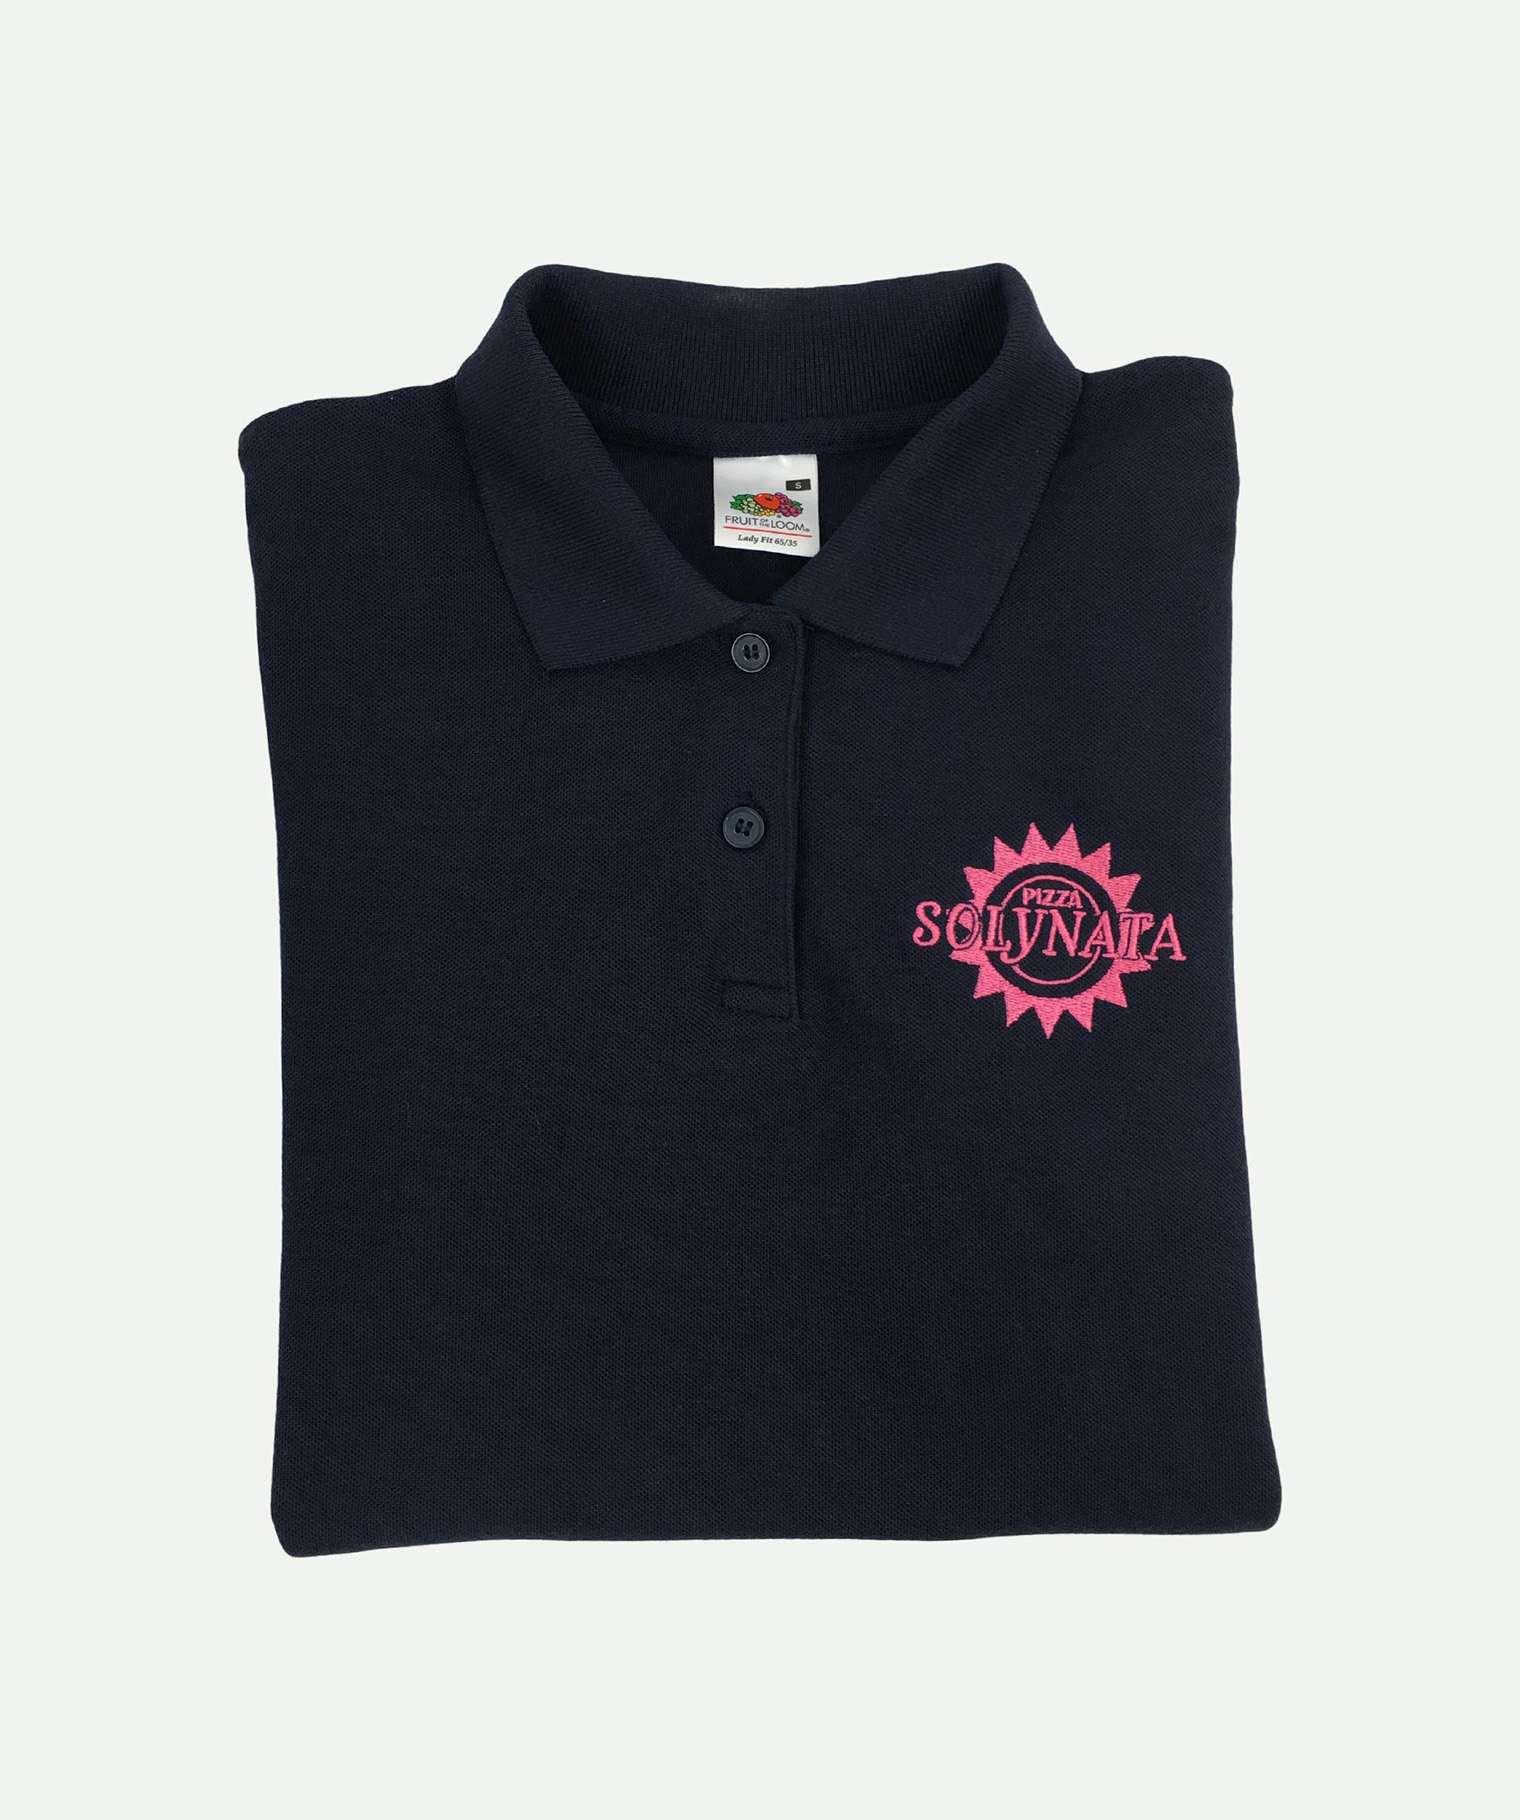 Women's embroidered polo shirt